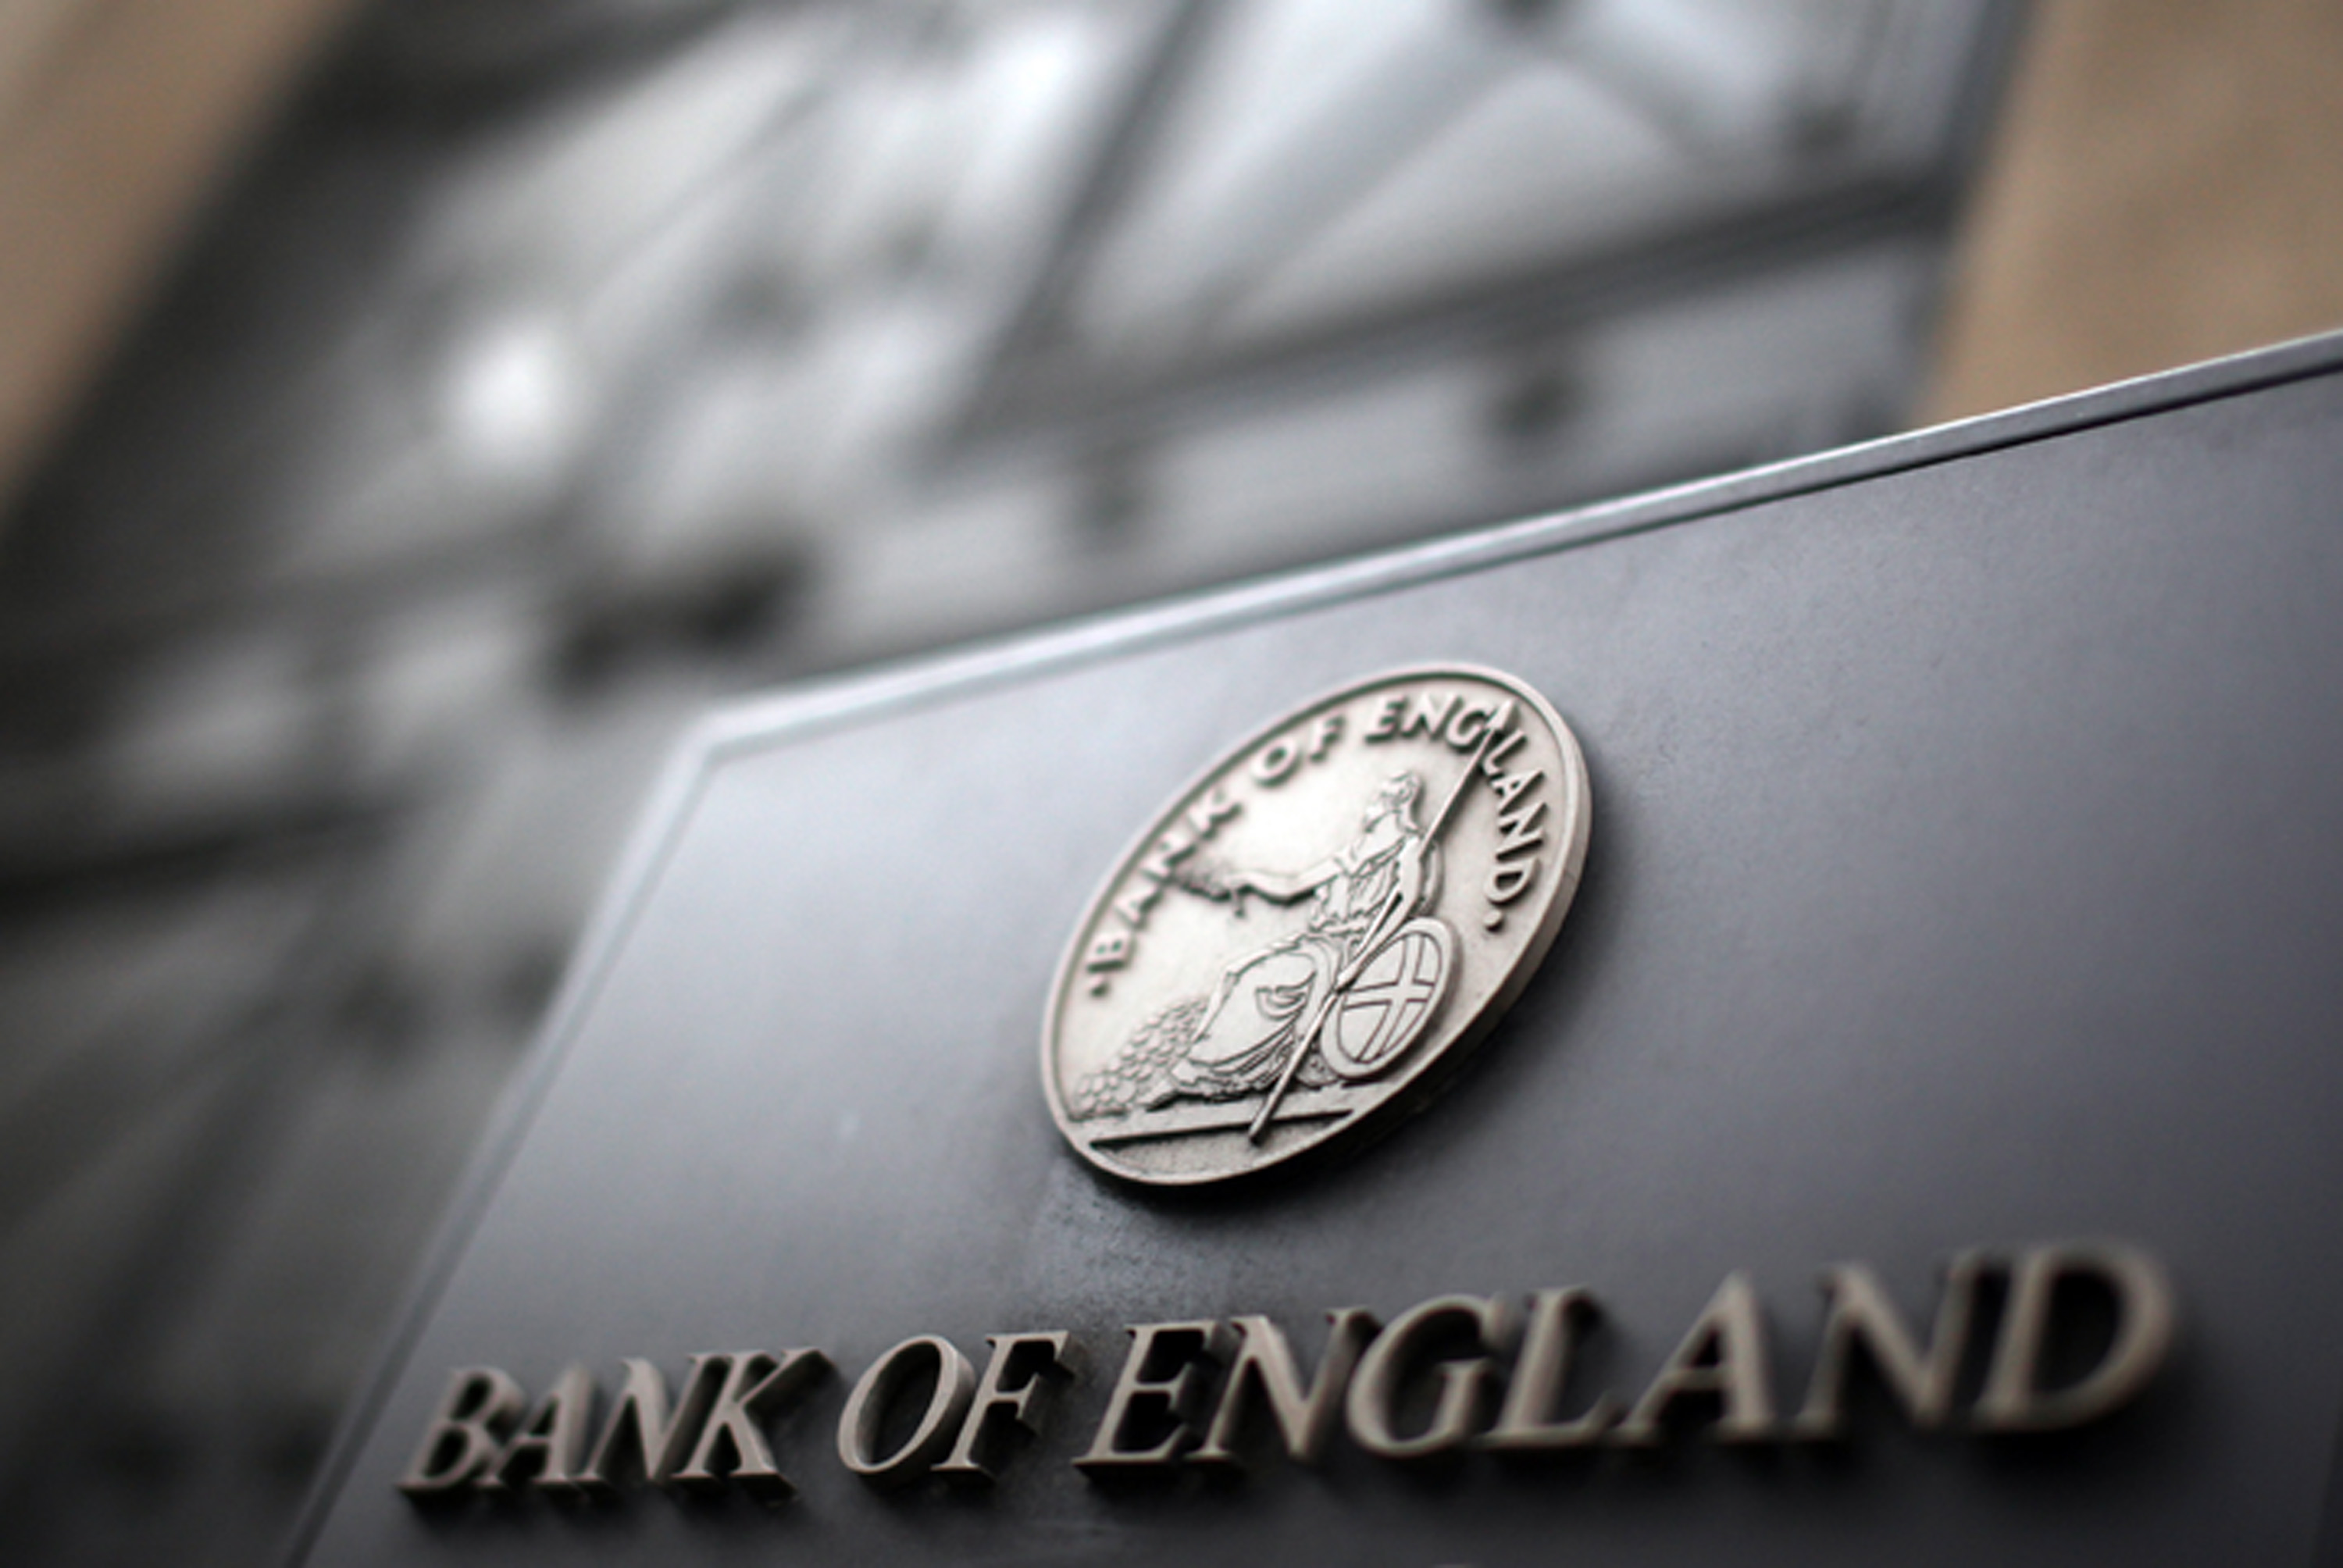 Bank of England to complete assessment of digital pound benefits by end of 2022